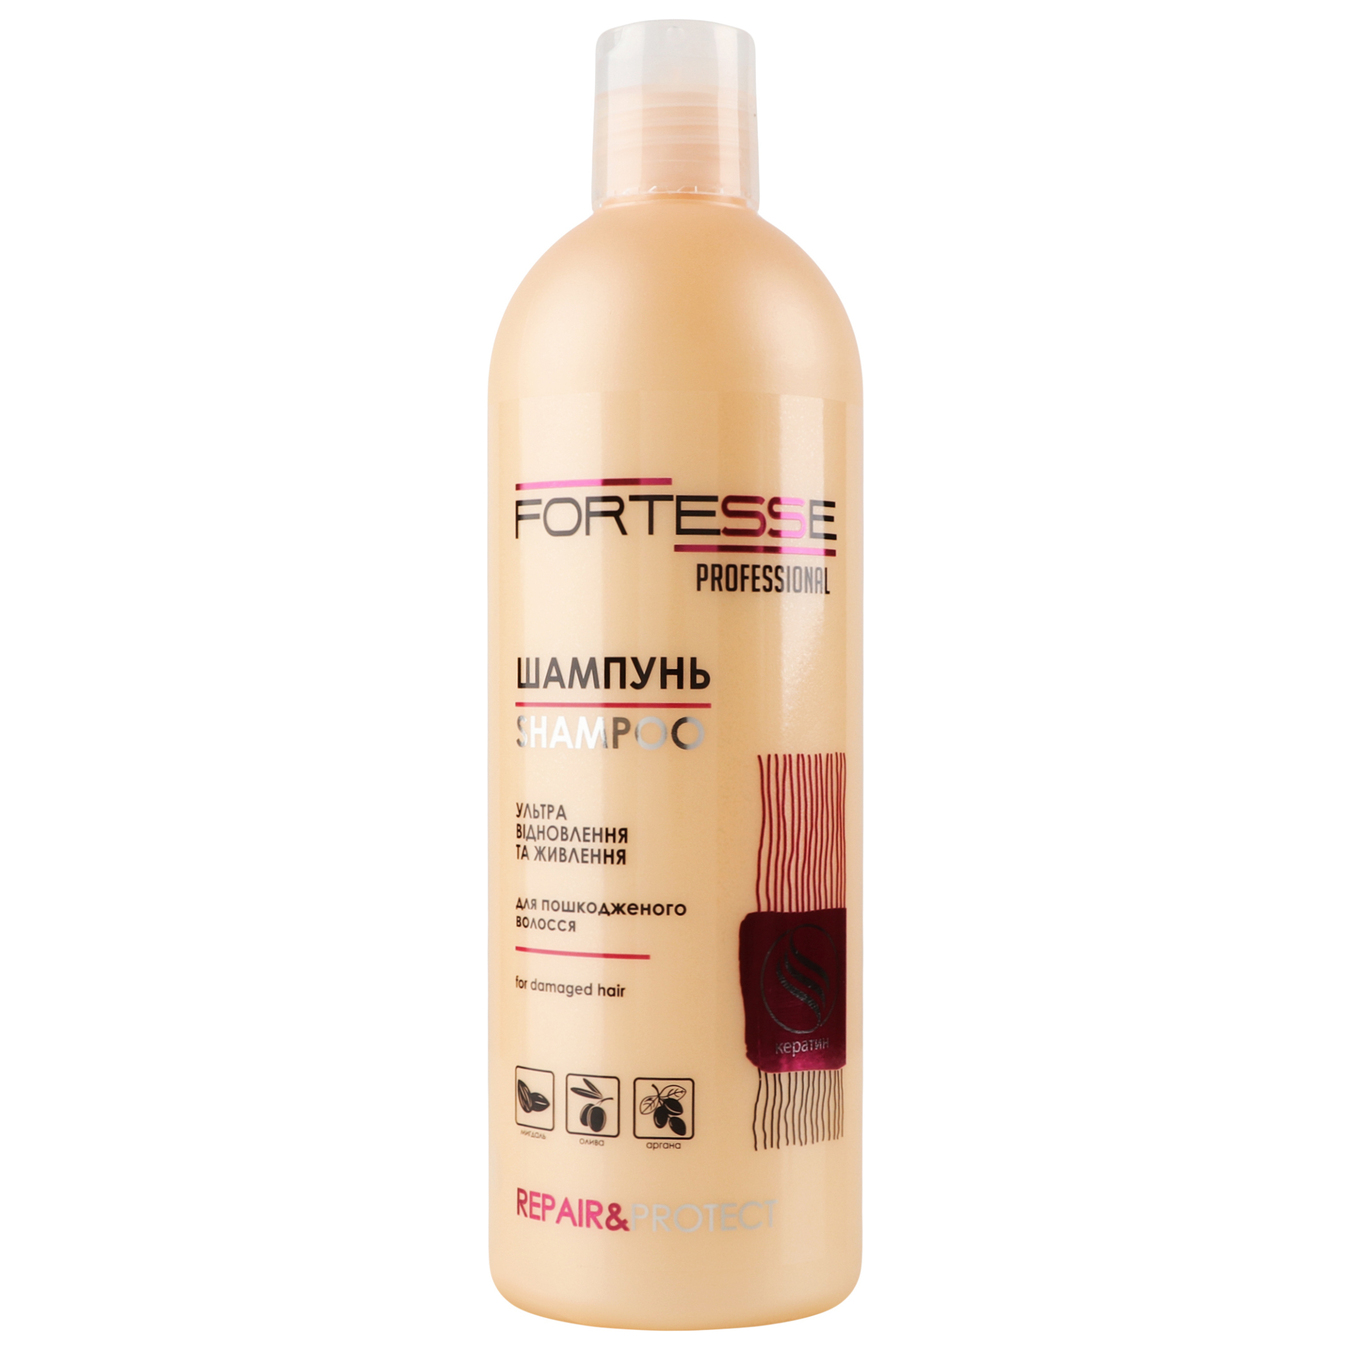 FORTESSE PRO repair&protect restorative shampoo for dry damaged hair in need of nourishment 400 ml